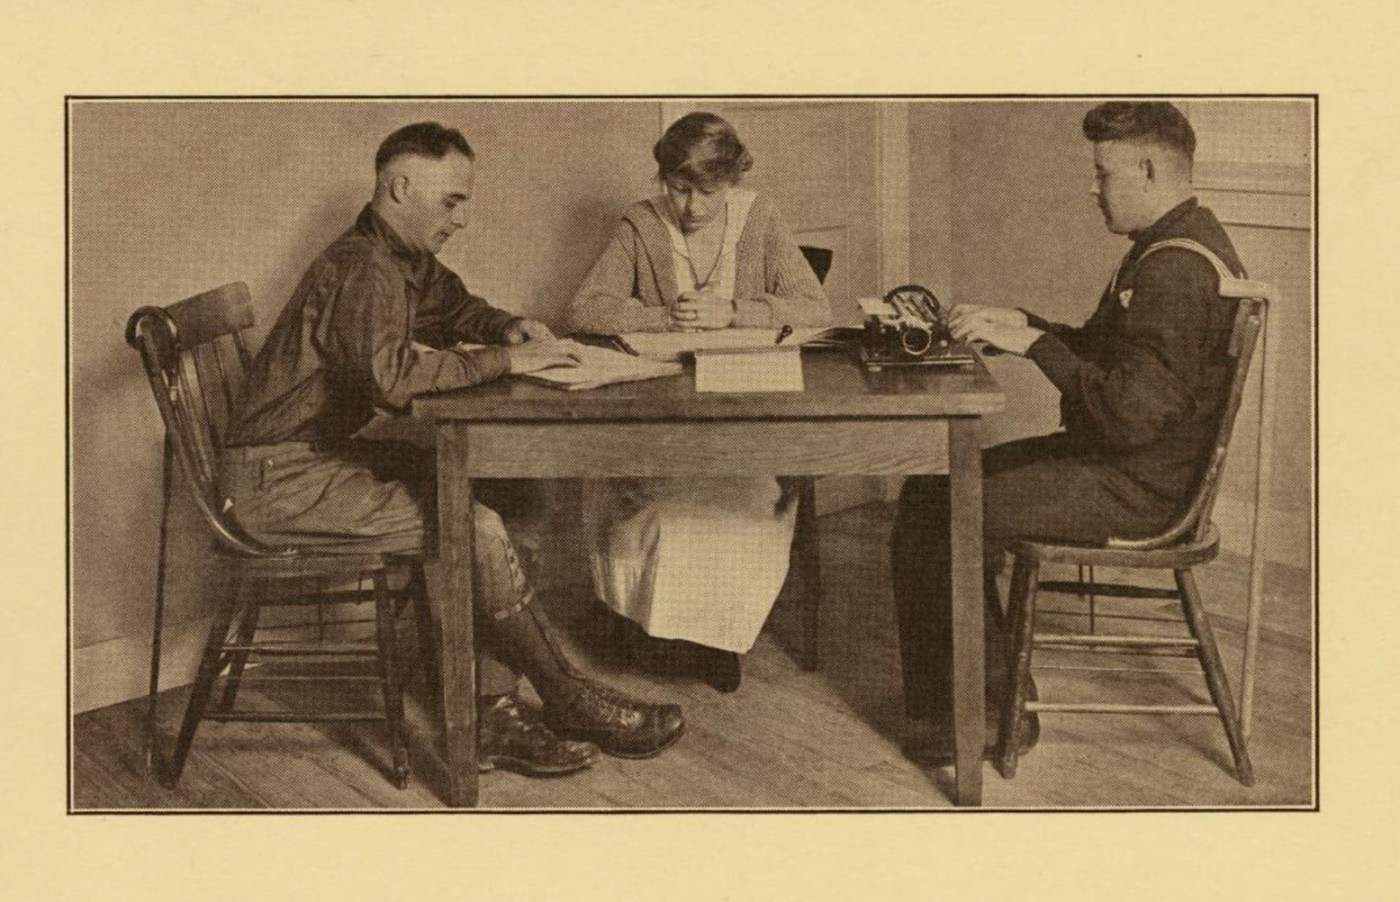 Two World War I servicemen with vision loss receive instruction on reading Braille and using a typewriter at the Army’s Evergreen facility near Baltimore, Maryland. (Perkins School for the Blind Archives)